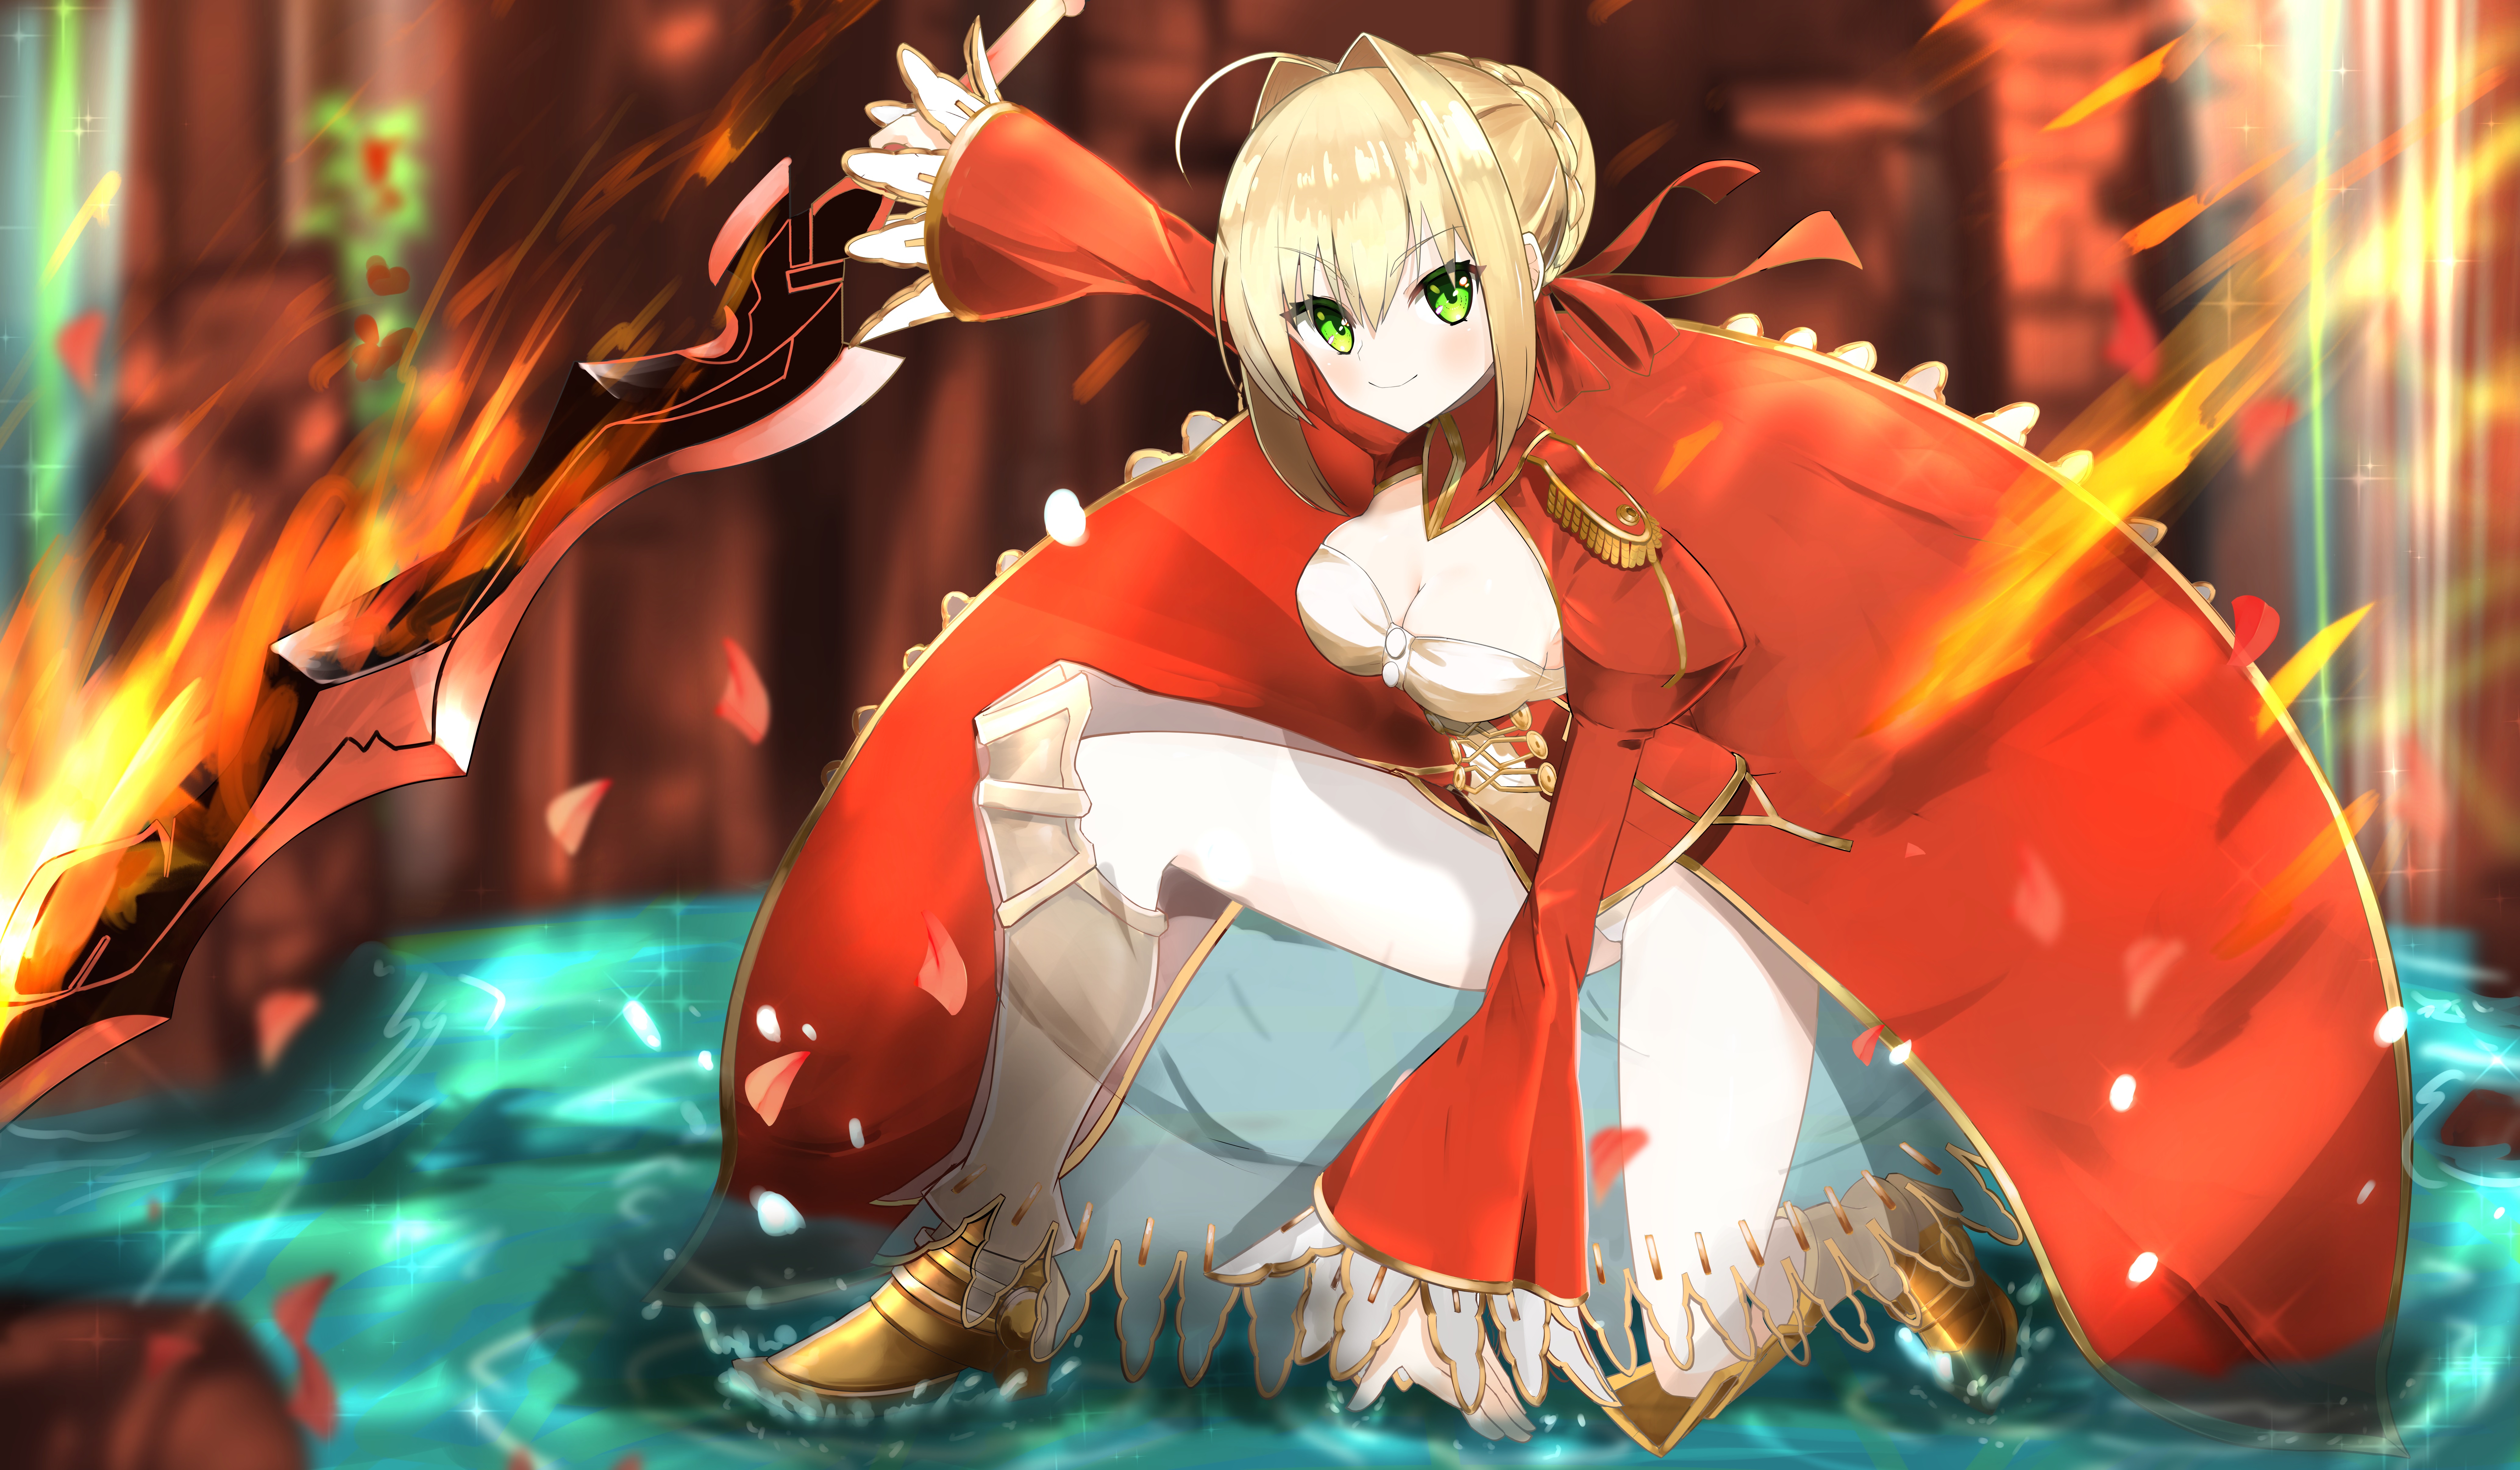 Anime 8268x4823 anime anime girls Fate/Extra Fate/Extella: The Umbral Star Fate/Extra CCC Nero Claudius blonde long hair artwork digital art fan art